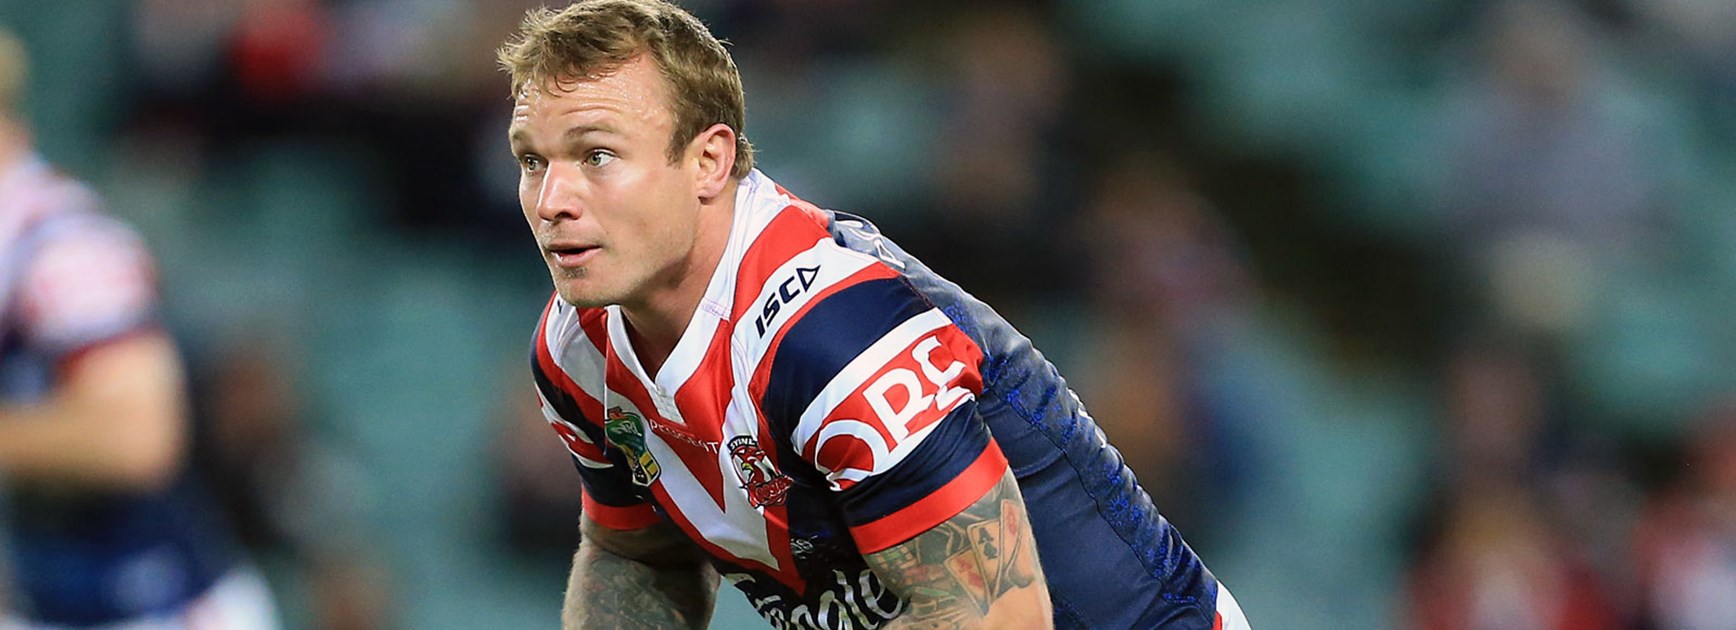 Roosters captain Jake Friend against the Broncos in Round 21.